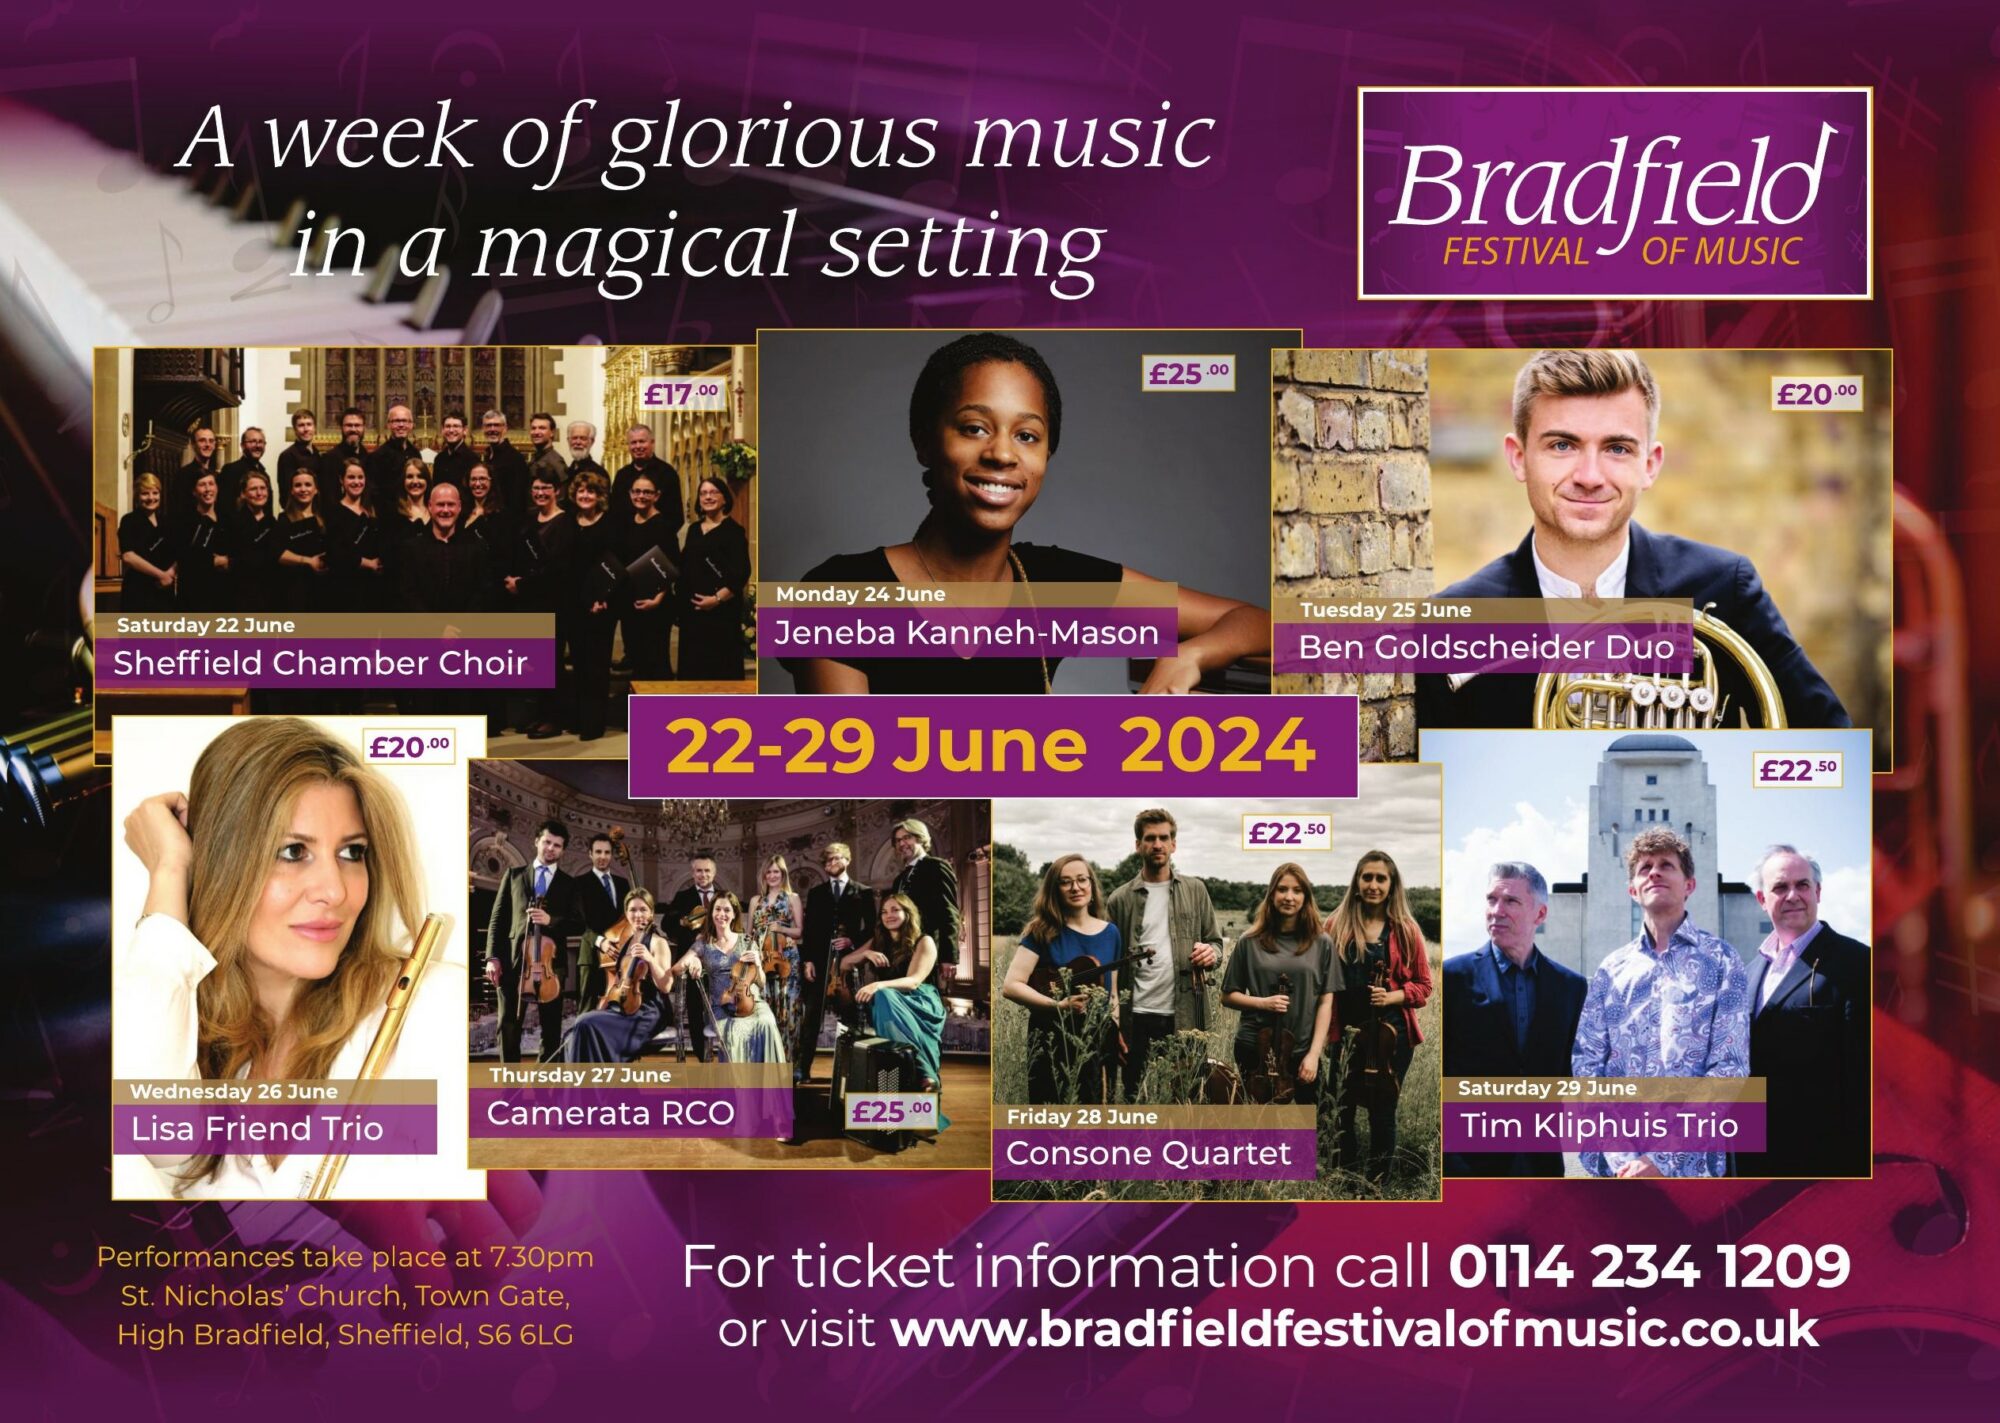 Image name BFoM Cover 2024 1.jpg 1cropped 1 the 20 image from the post Bradfield Festival of Music in Yorkshire.com.